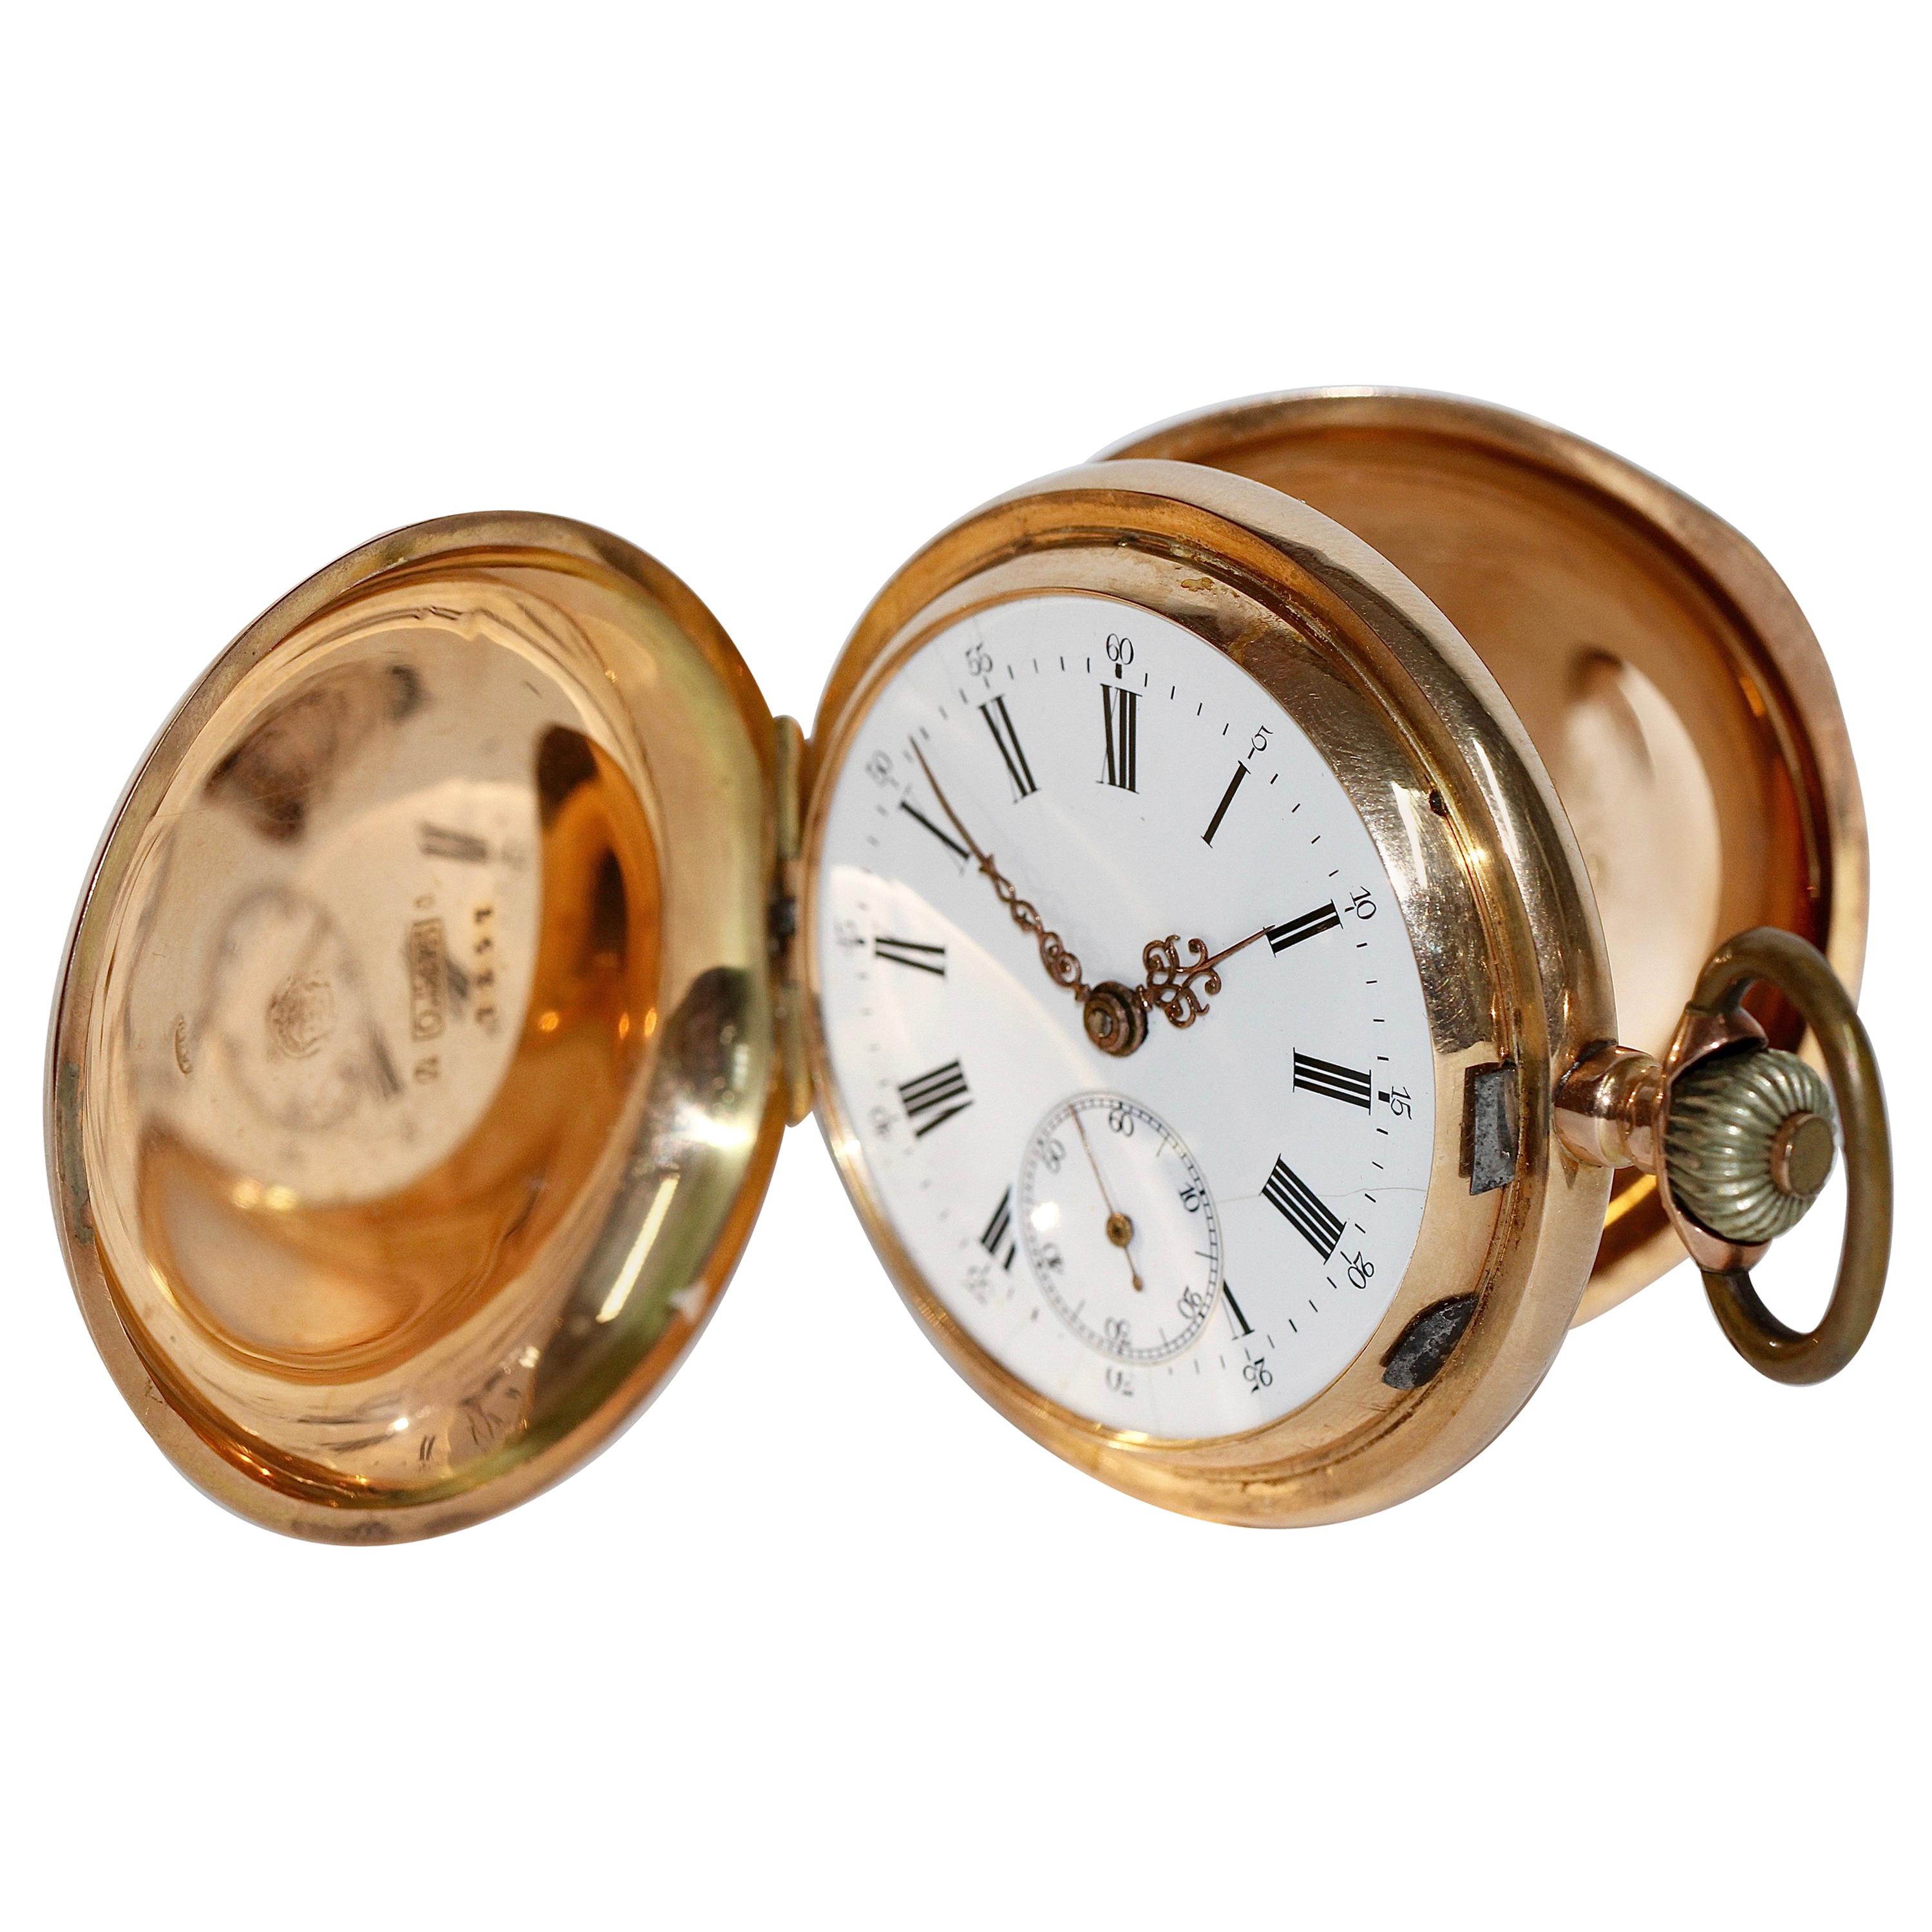 Alfred Lugrin rose gold Minute Repeating Erotic Automaton Hunter Pocket Watch